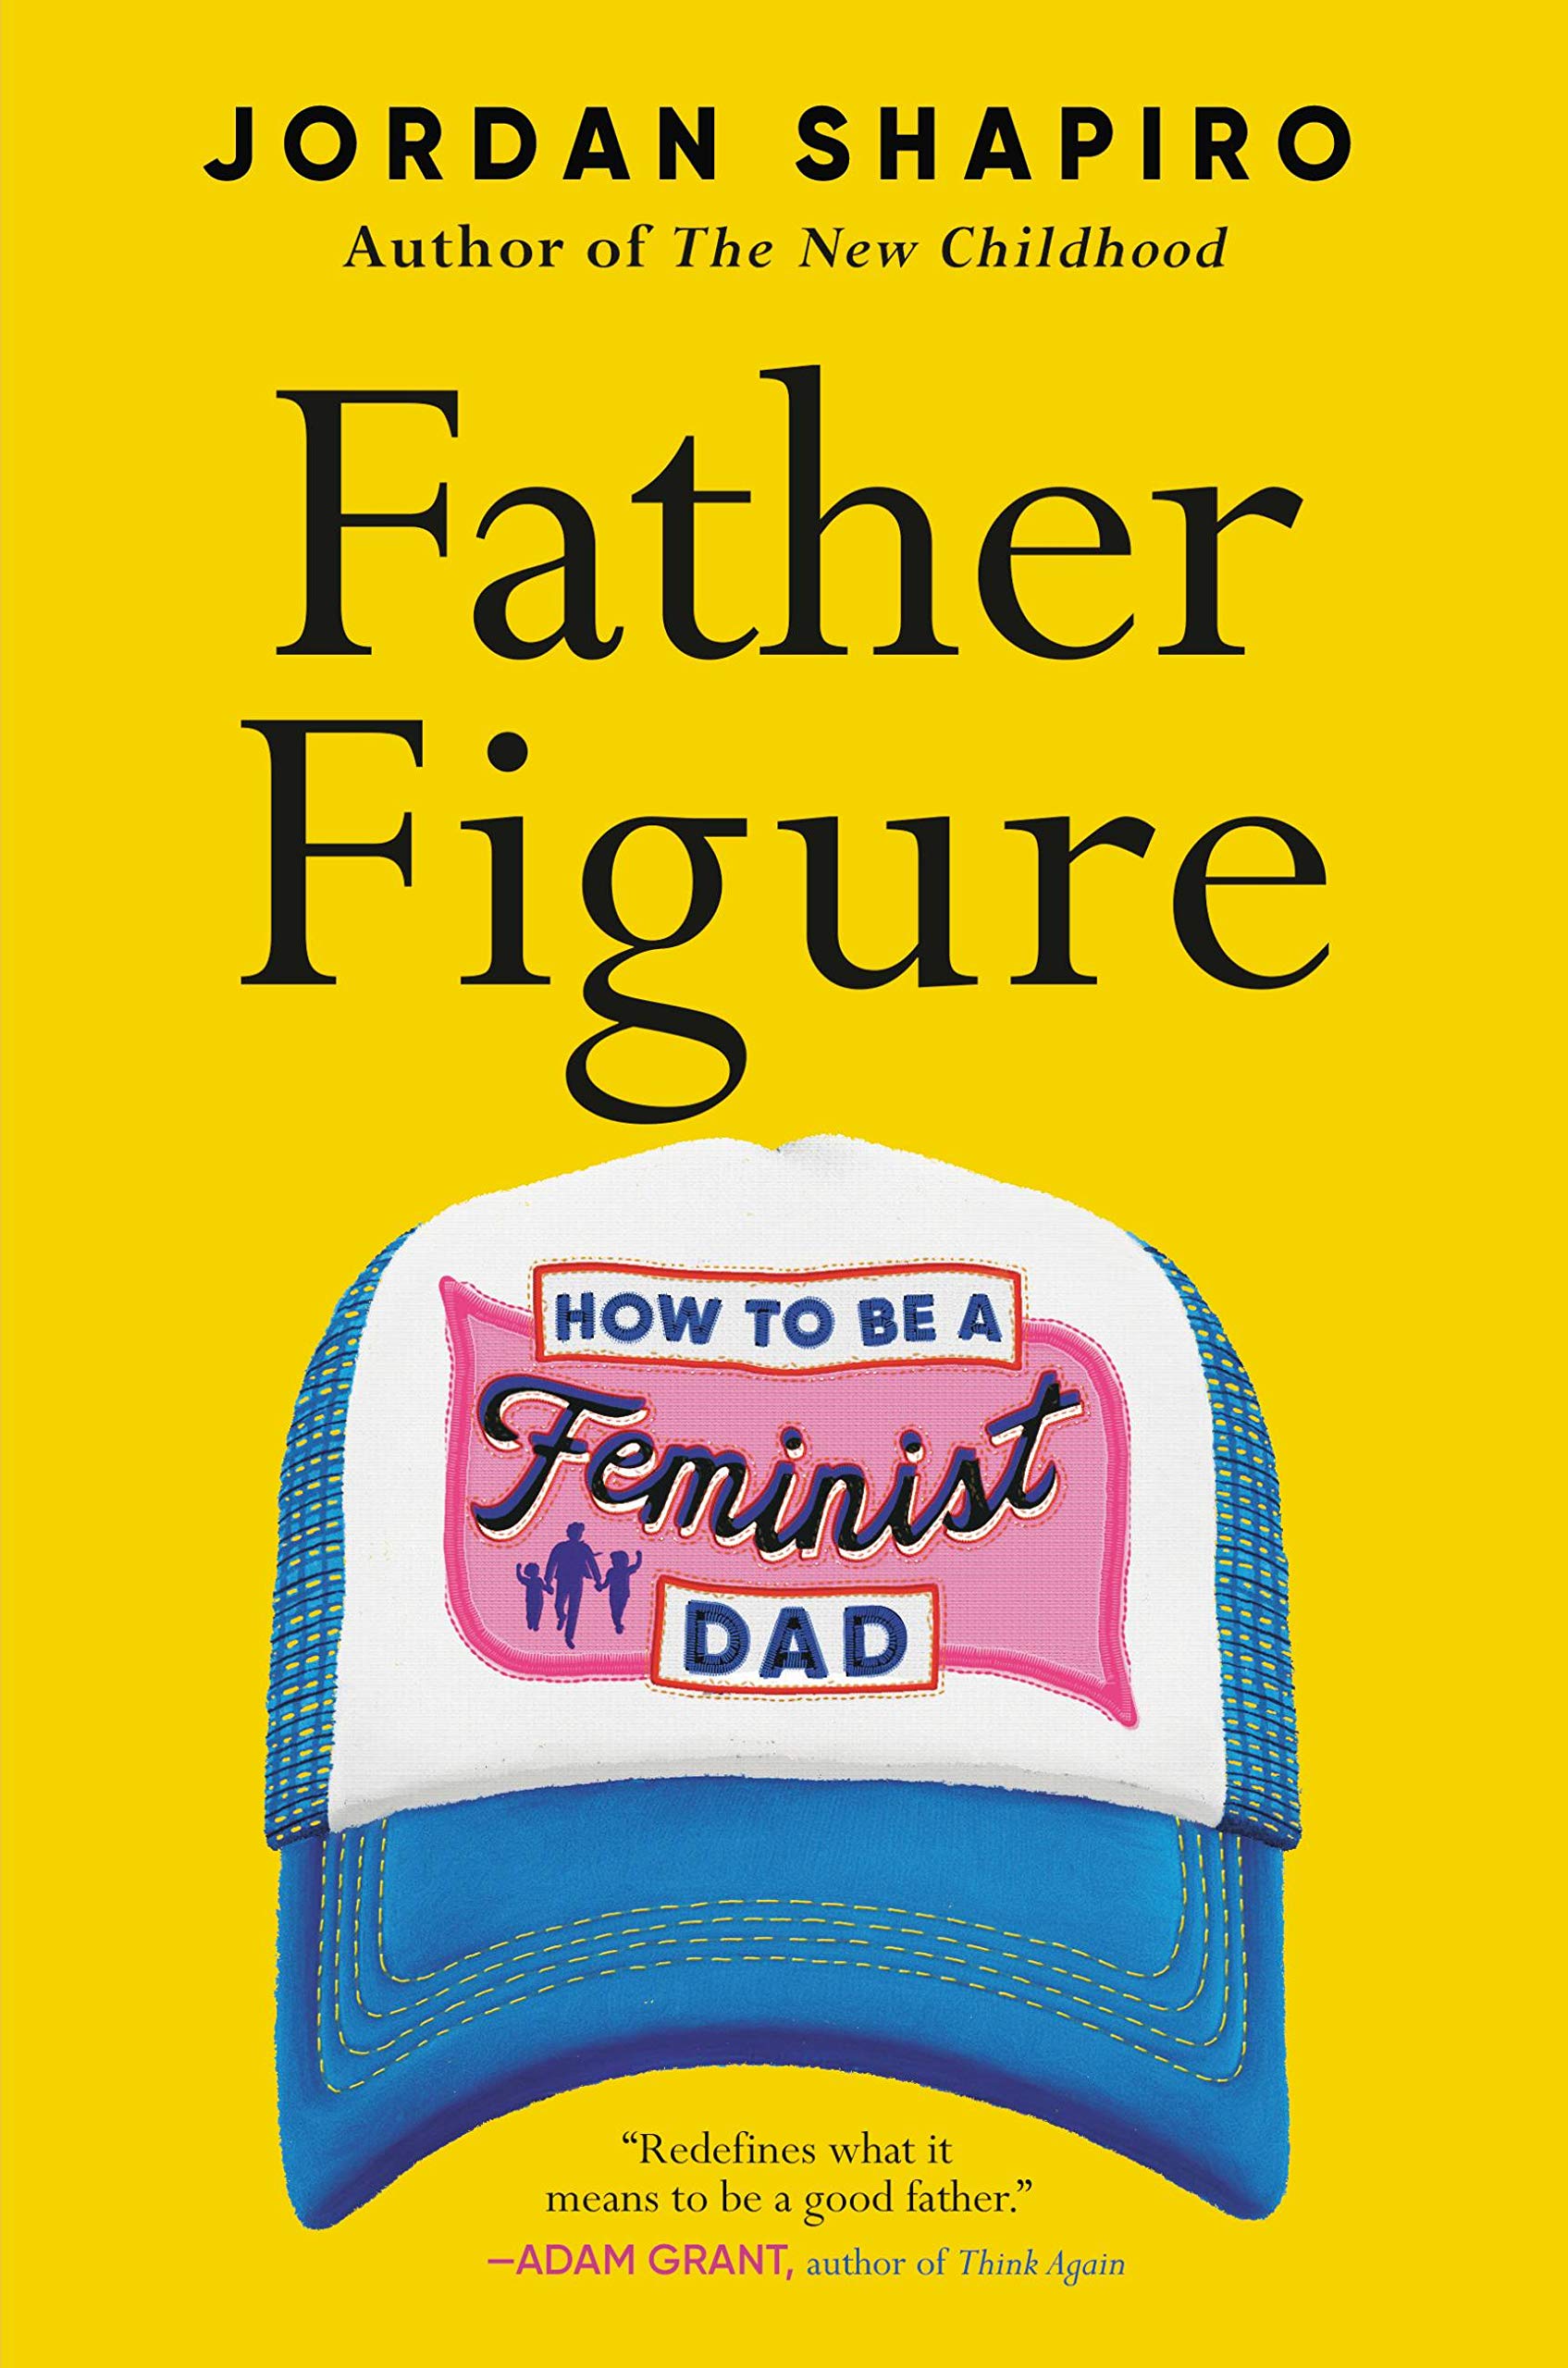 Image for "Father Figure"